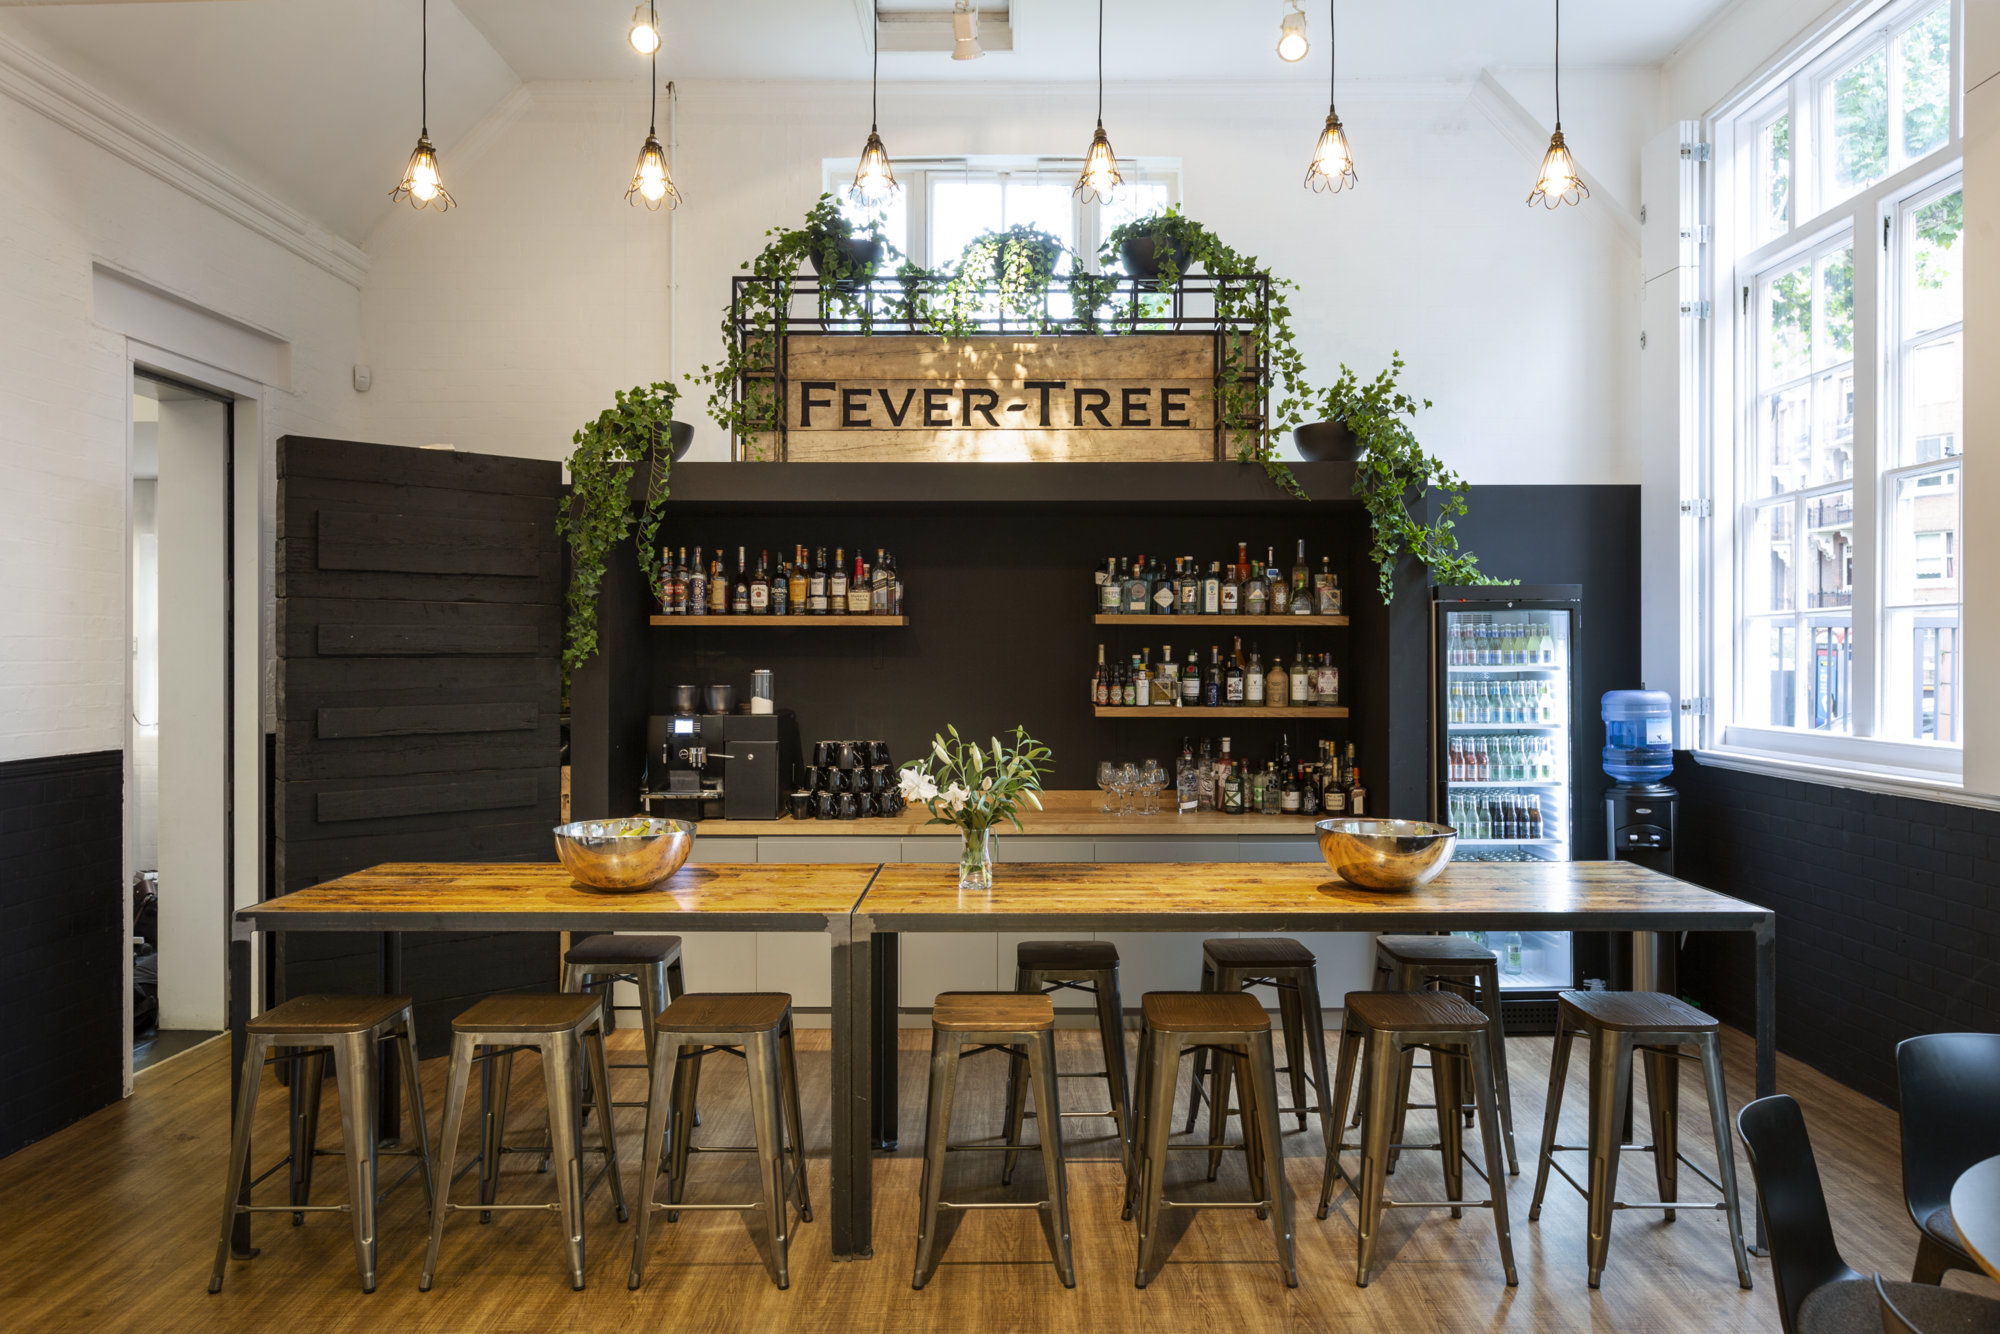 Fever-Tree Offices - London | Office Snapshots